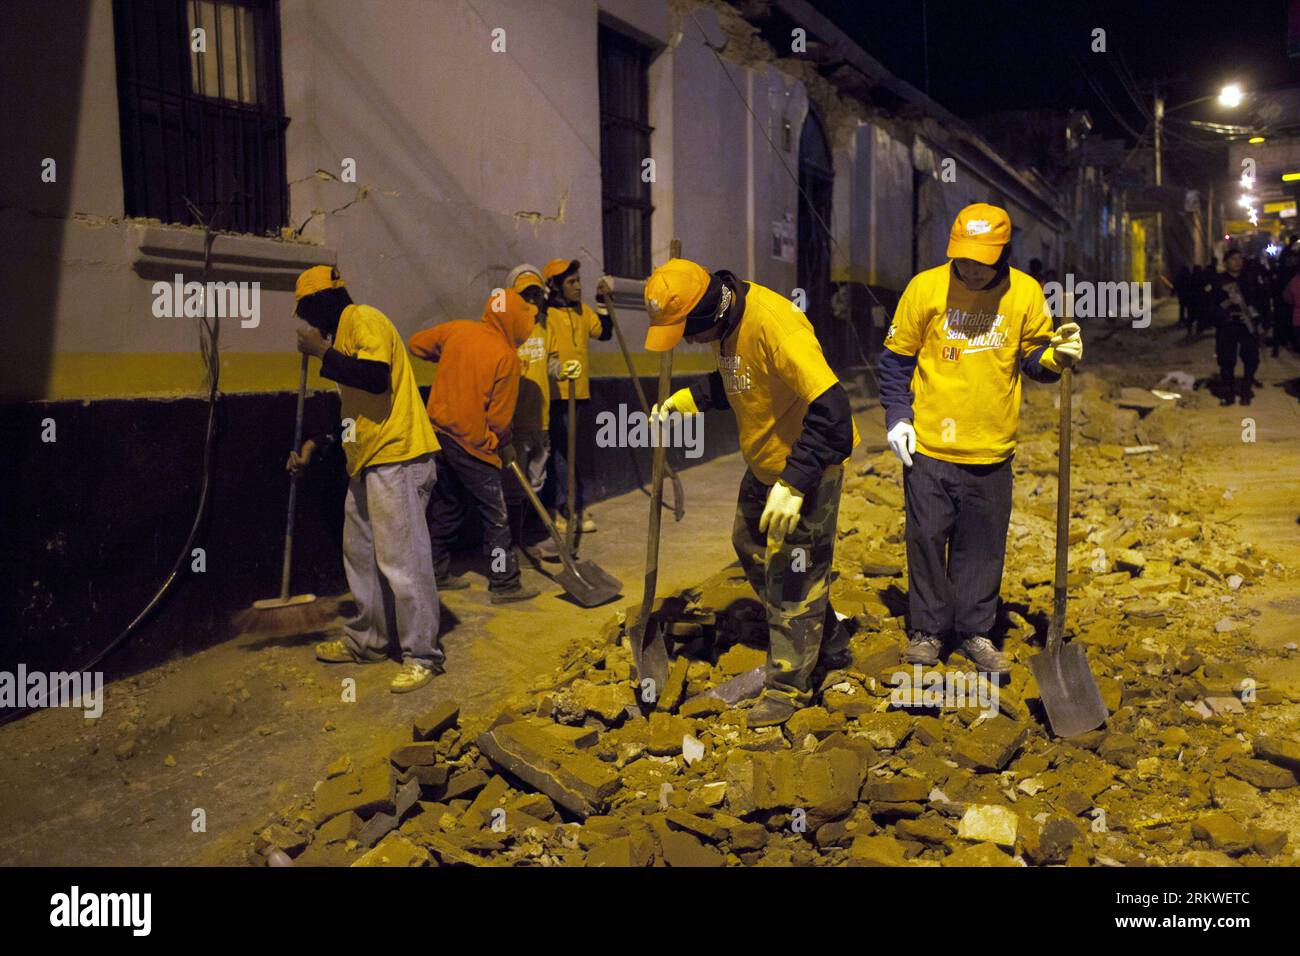 Bildnummer: 58676839  Datum: 07.11.2012  Copyright: imago/Xinhua SAN MARCOS, (Xinhua) -- Employees clean the debris left after an earthquake, in San Marcos, Guatemala, on Nov. 7, 2012. A 7.4 degree on the Richter scale earthquake affected Guatemala on Wednesday, the epicenter was located at sea, 24 km south of Champerico port municipalty, Guatemala, according to United States Geologic Service (USGS) data. (Xinhua/Luis Echeverr¨ªa) (le) (rh) (ce) GUATEMALA-SAN MARCOS-ENVIRONMENT-EARTHQUAKE PUBLICATIONxNOTxINxCHN Gesellschaft Erdbeben Aufräumarbeiten Natarkatastrophe premiumd x0x xac 2012 quer Stock Photo